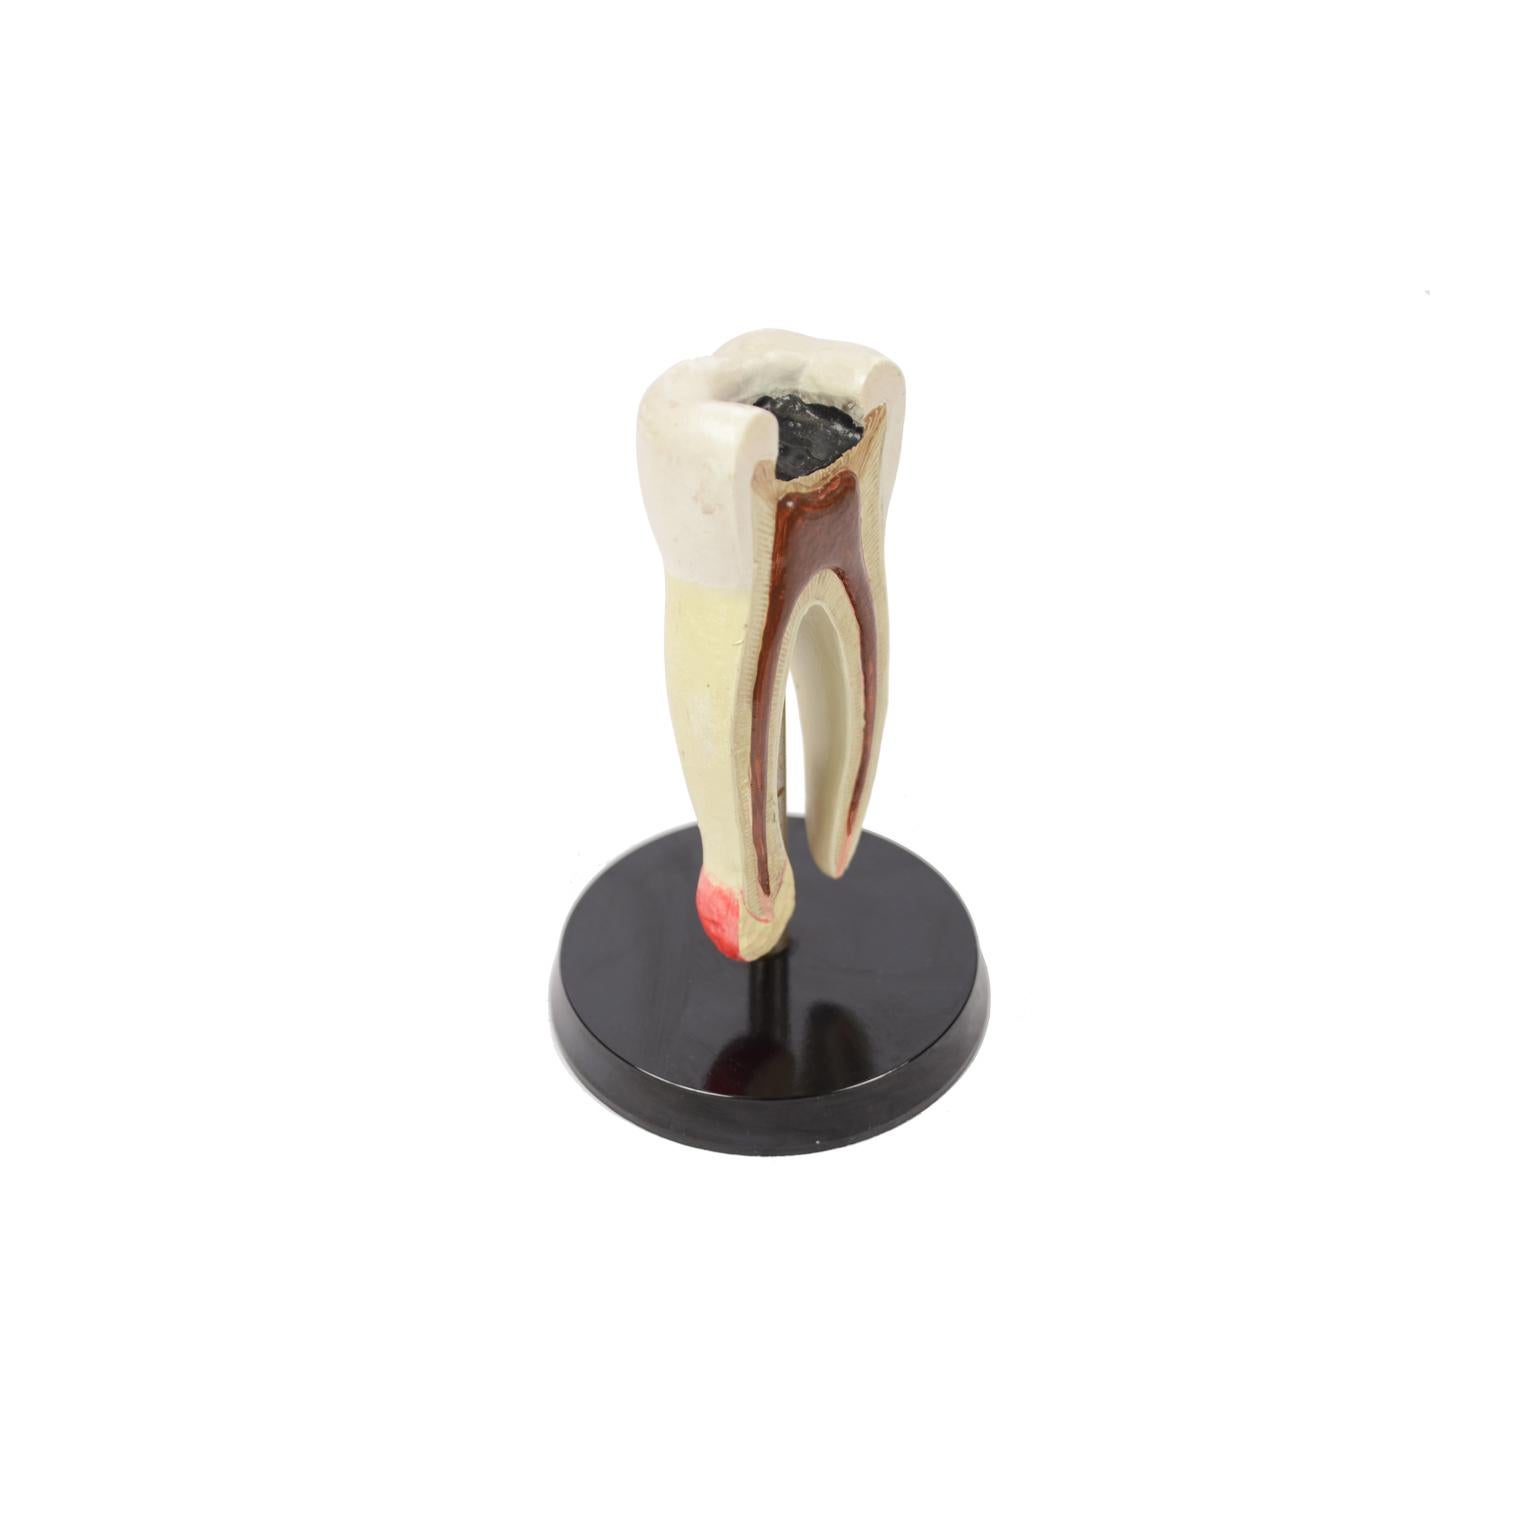 Didactic anatomical enlarged model of a molar tooth in section with double root made of hand-painted rubber resin in ??Germany in the fifties and mounted on a bakelite base. Very good condition. Measures: Height with base cm 14, base diameter cm